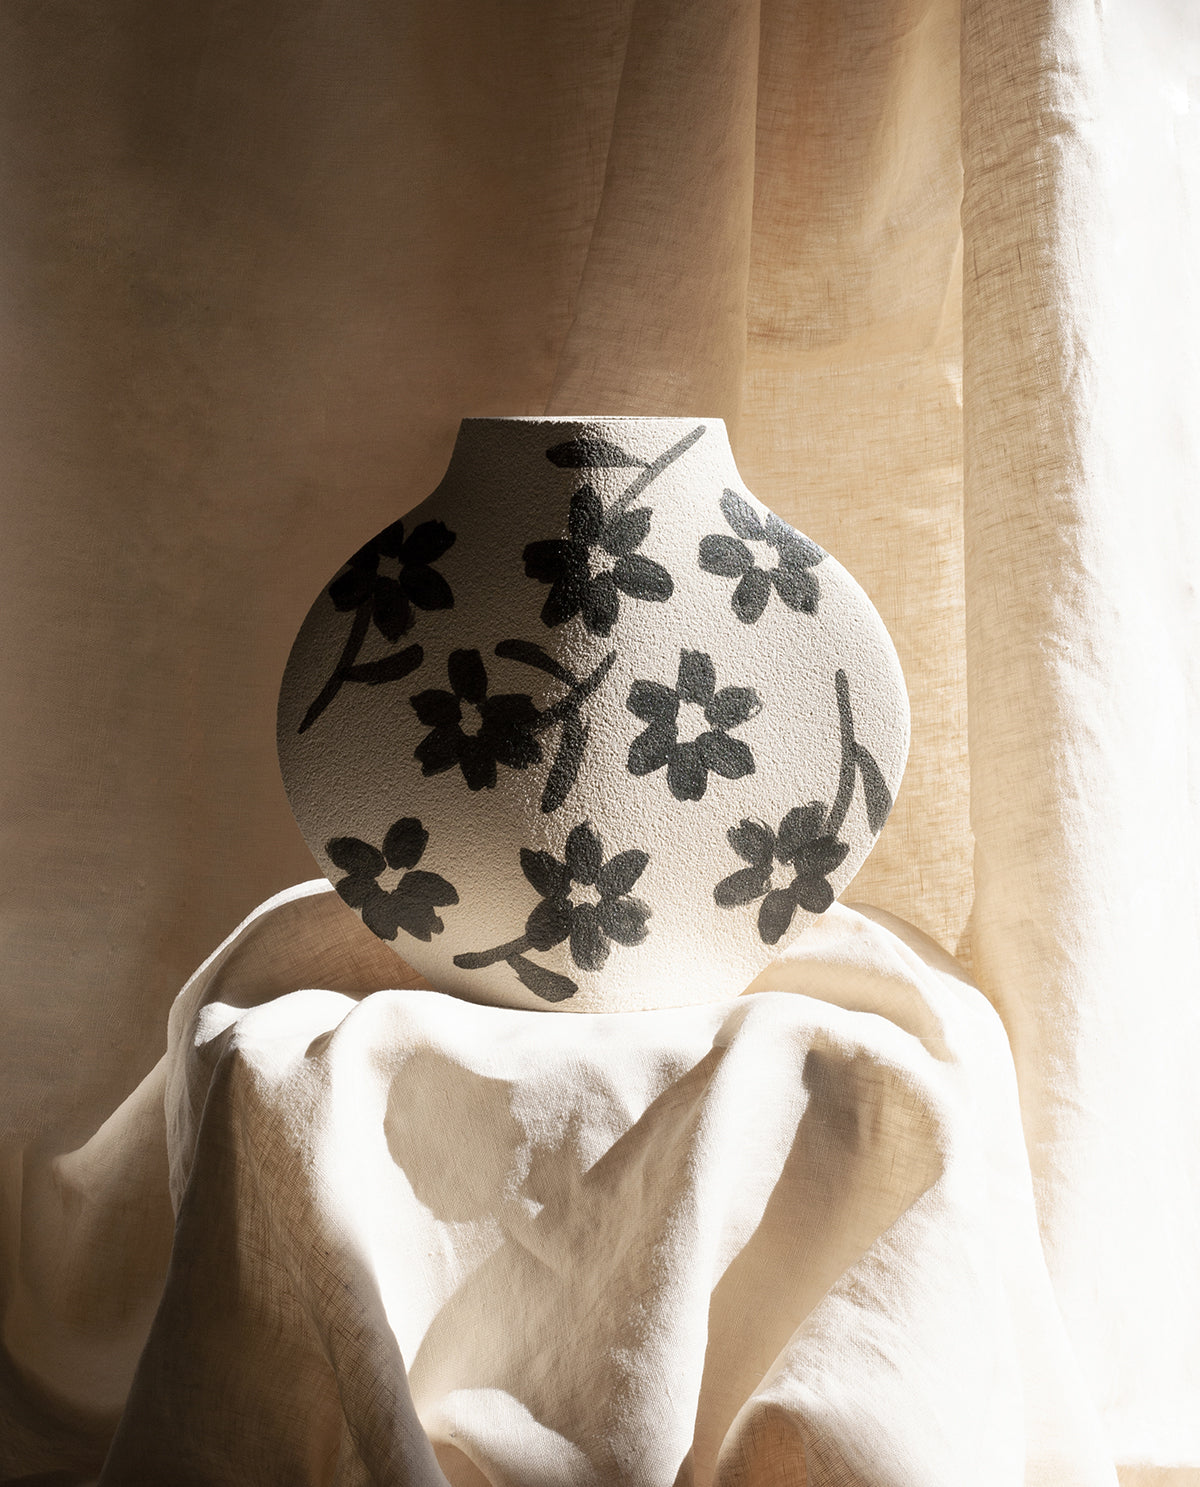 Hand-painted floral vase by INI CERAMIQUE with flowers patterns and textured finish